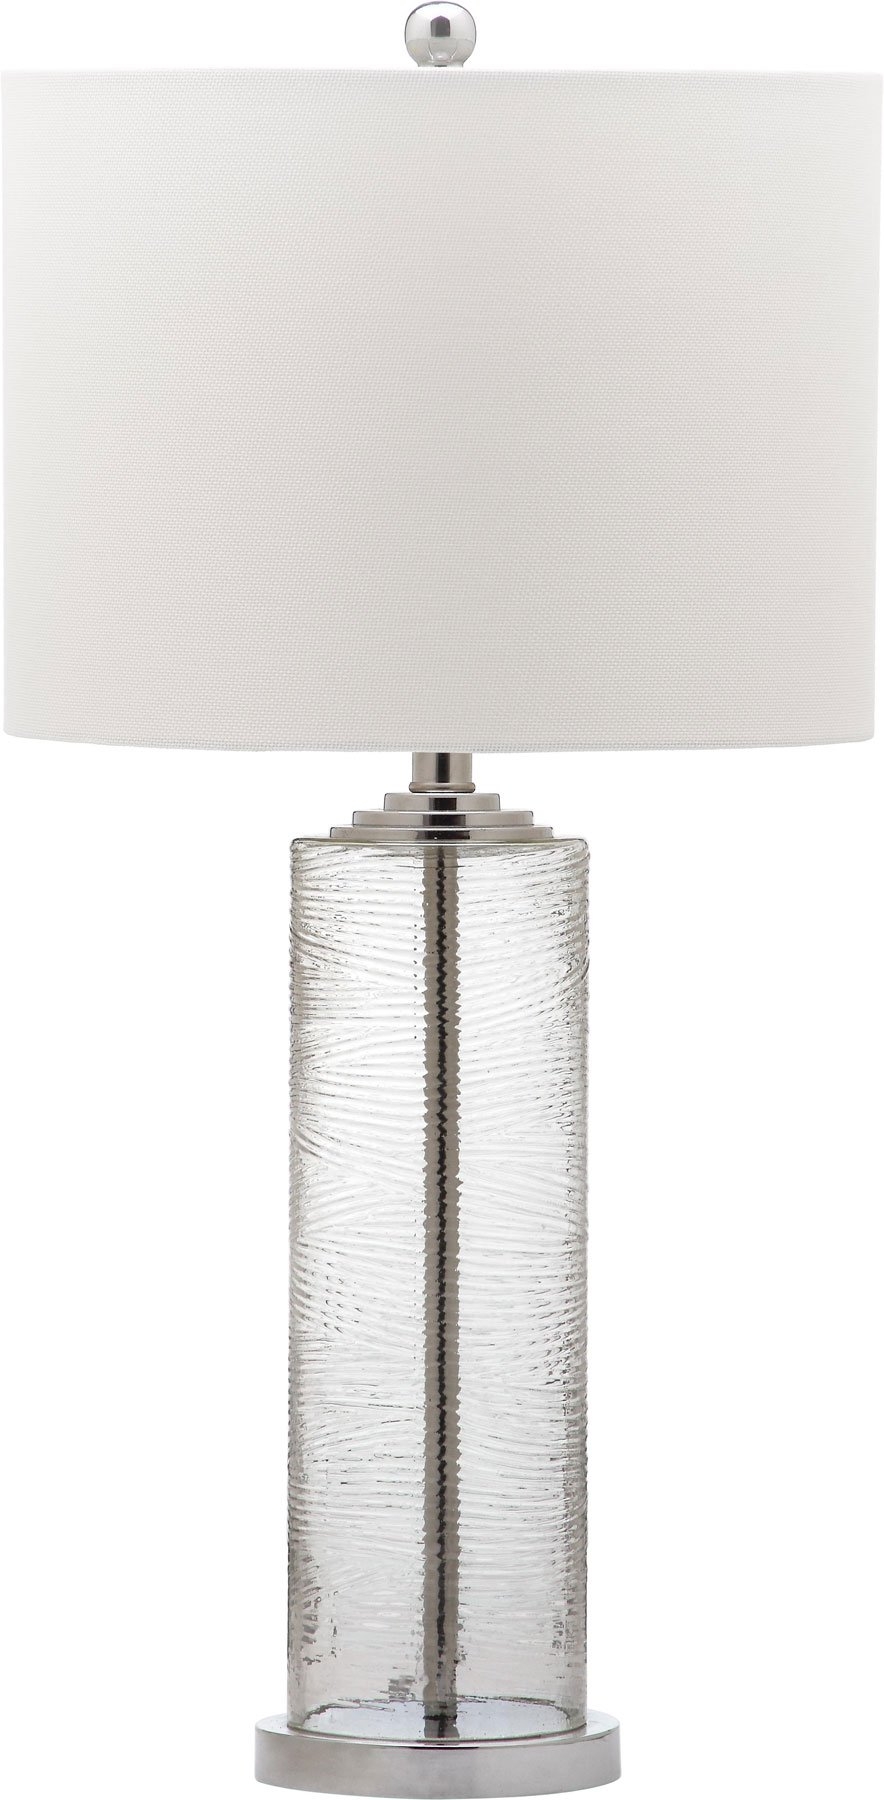 Grant Table Lamp, Set of 2 - Image 2